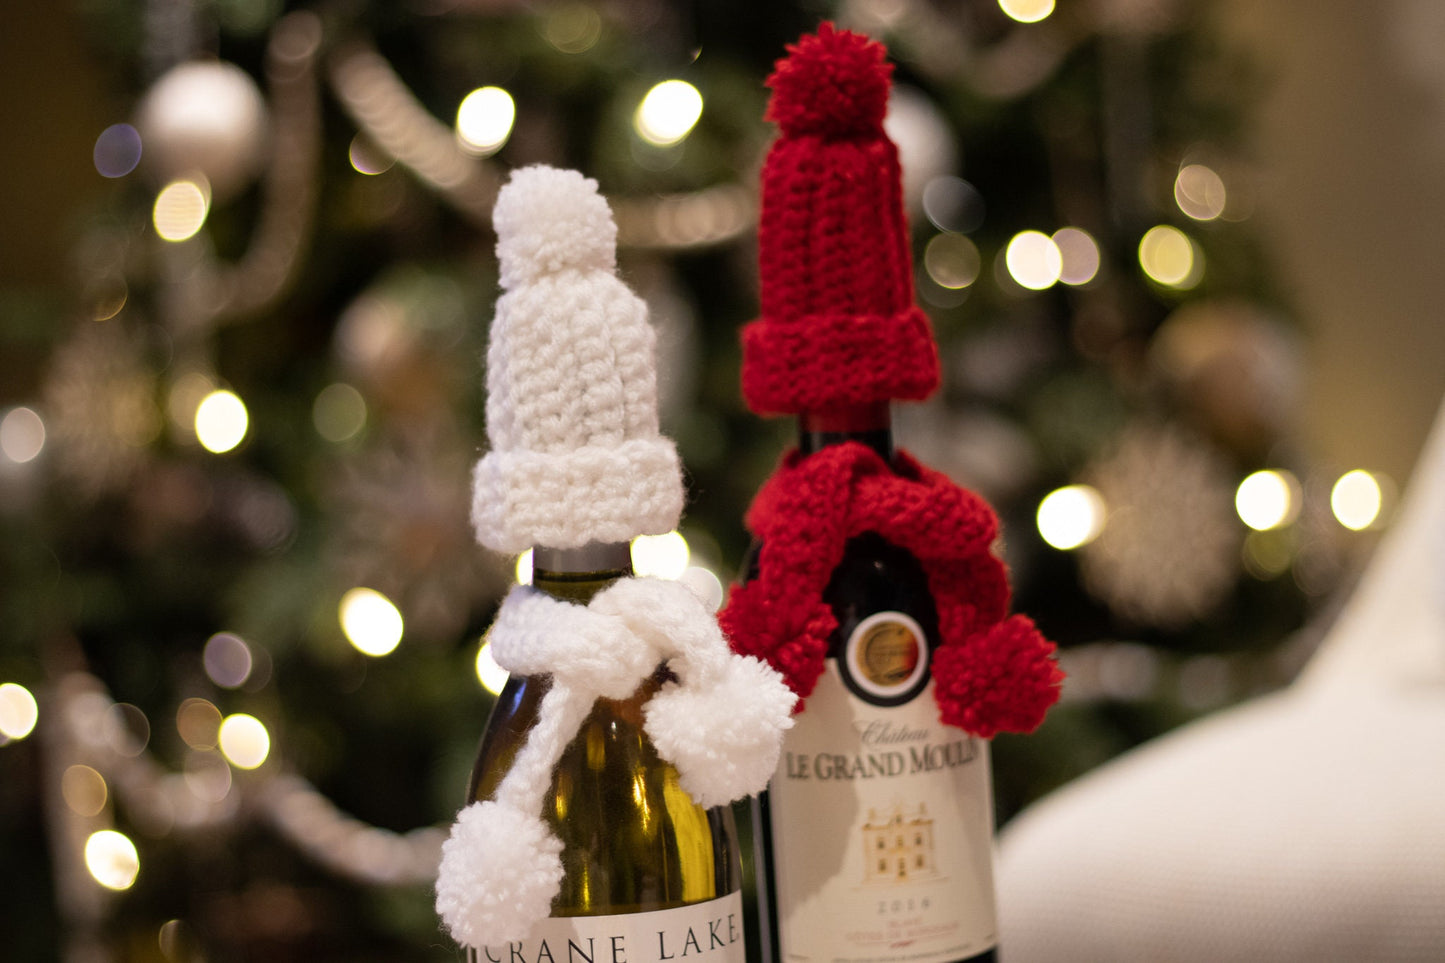 Cozy Wine Bottle Hat and Scarf Hand Crocheted in Snow White and Red - Set of 2